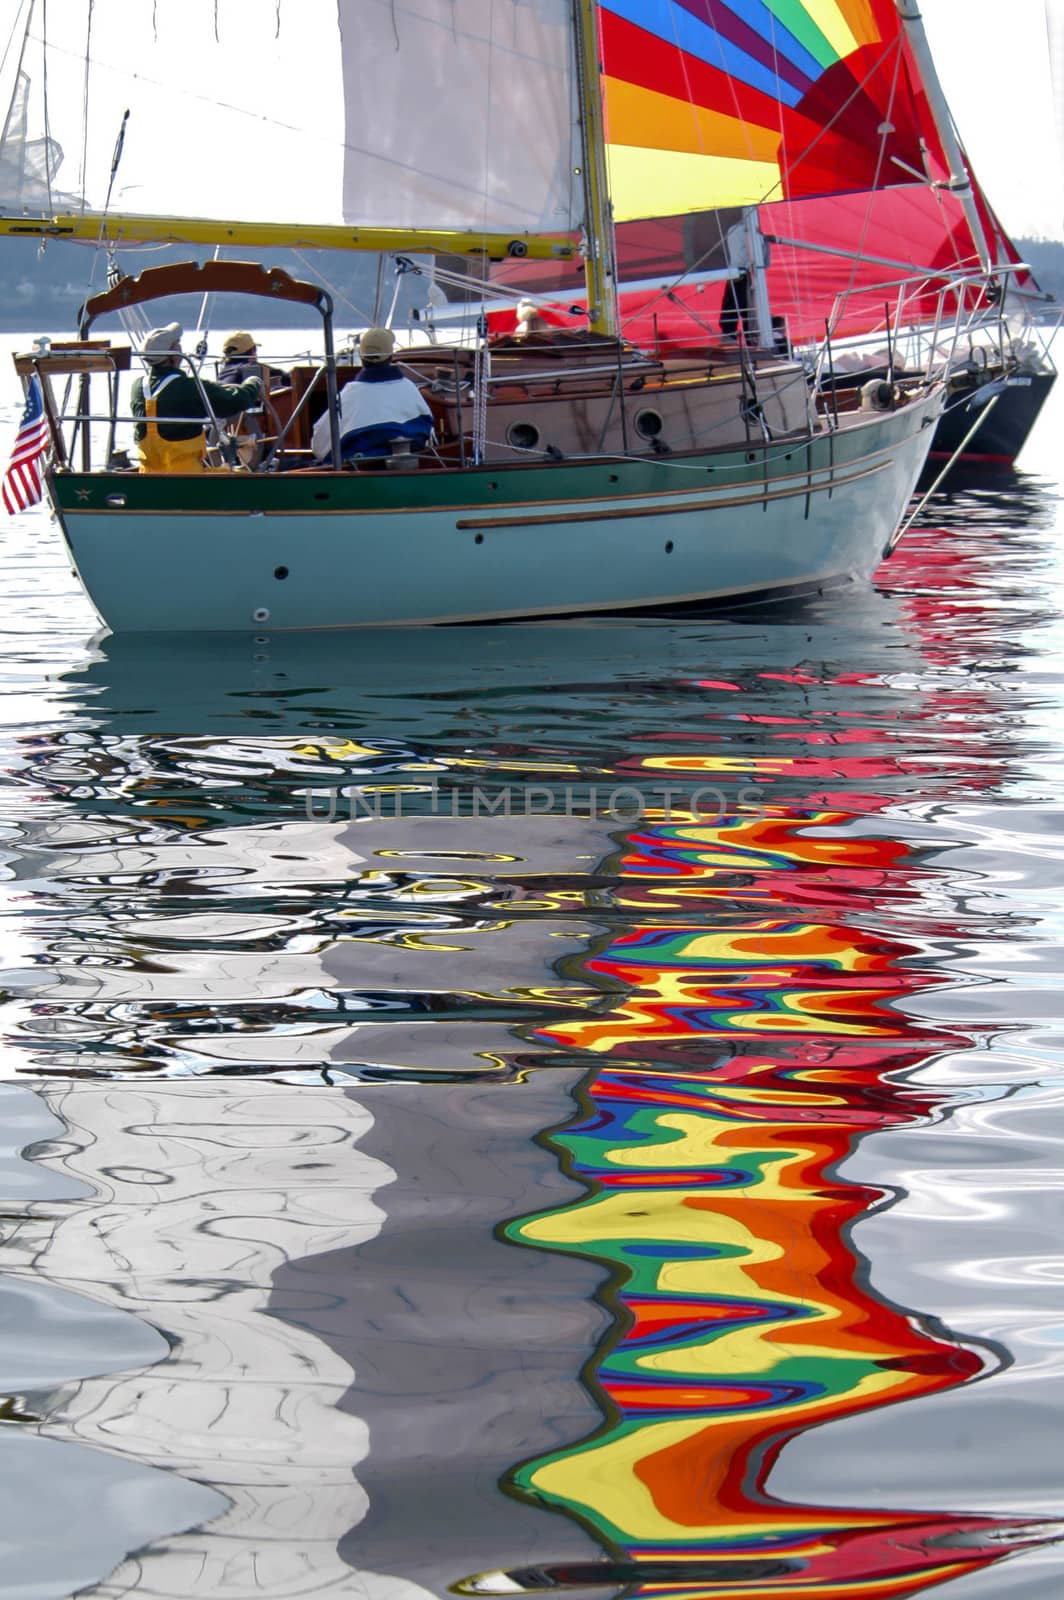 Reflections of colorful sails on calm day.